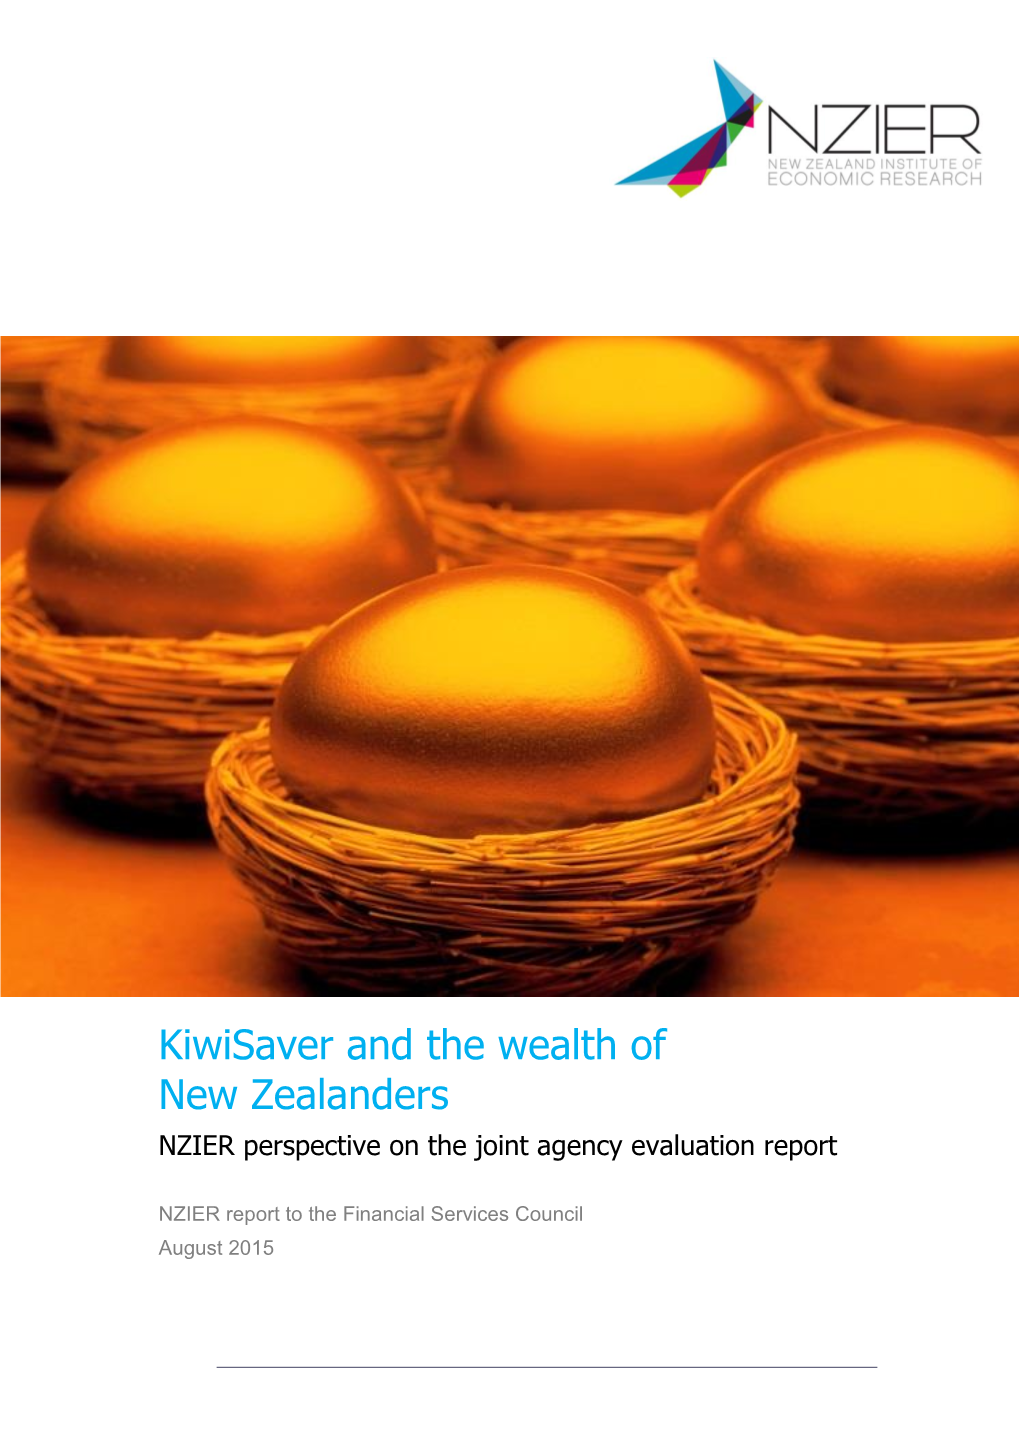 Kiwisaver and the Wealth of New Zealanders NZIER Perspective on the Joint Agency Evaluation Report